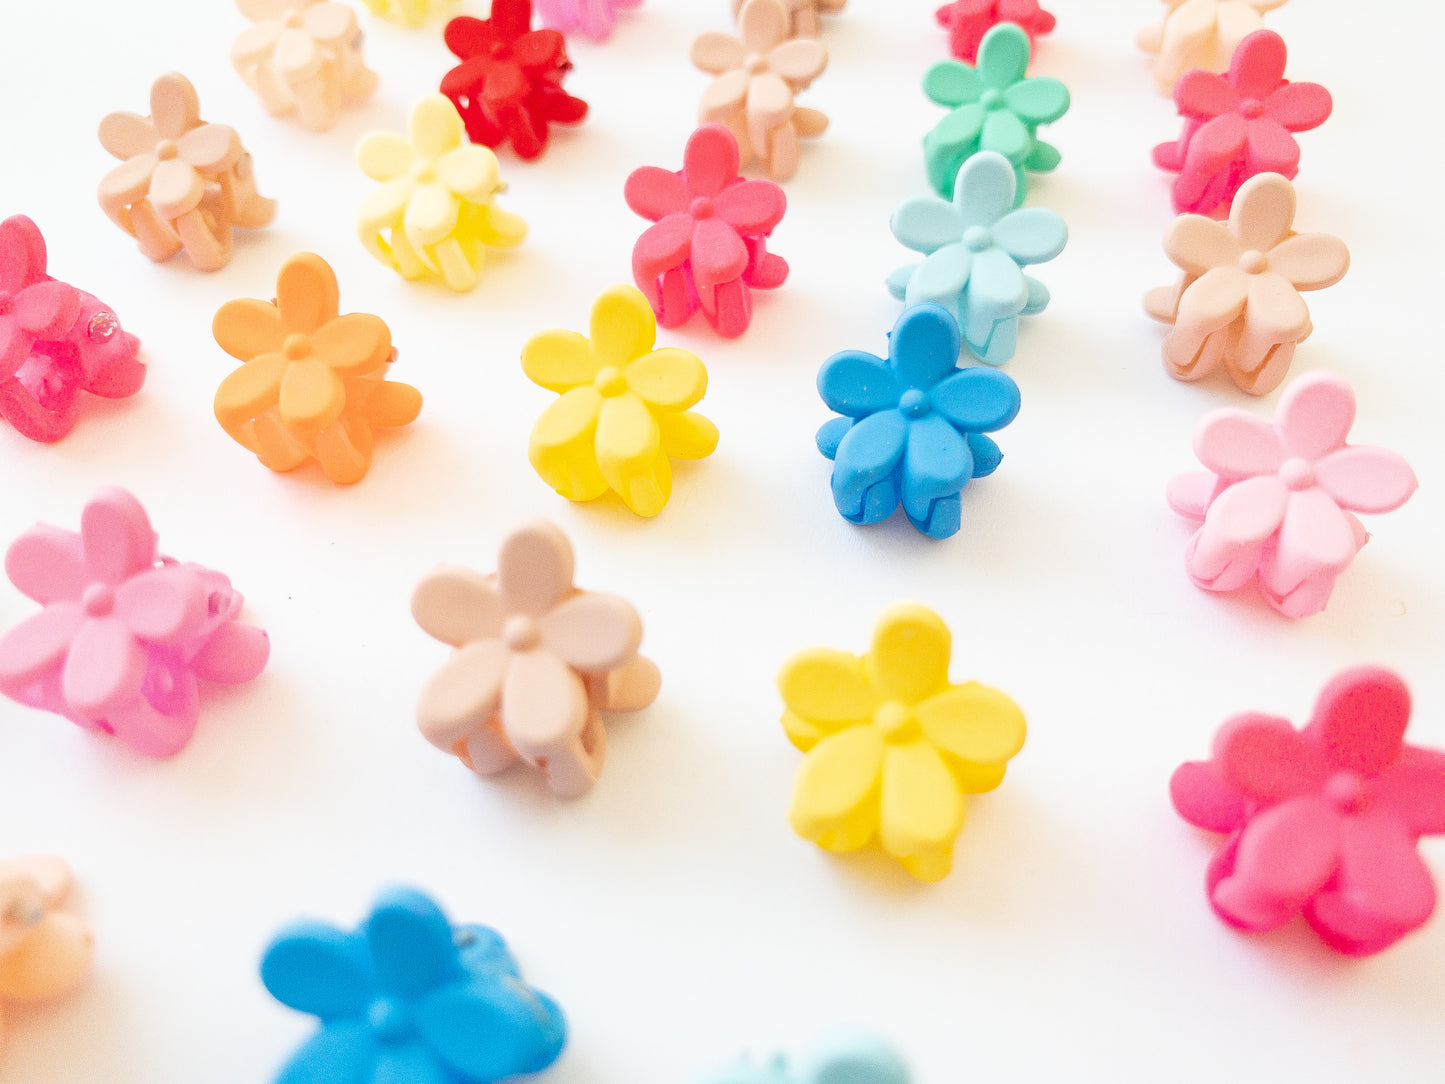 Our signature Korean style mini flower hair clips! Each hair clip is only half an inch in length and is great for clipping your hair back in pretty garden rows or using one or two to keep your hair from your face. Each box comes with 36 dainty pieces in a variety of pretty colors in our very own Eggy Cakes box. These really are a must have!